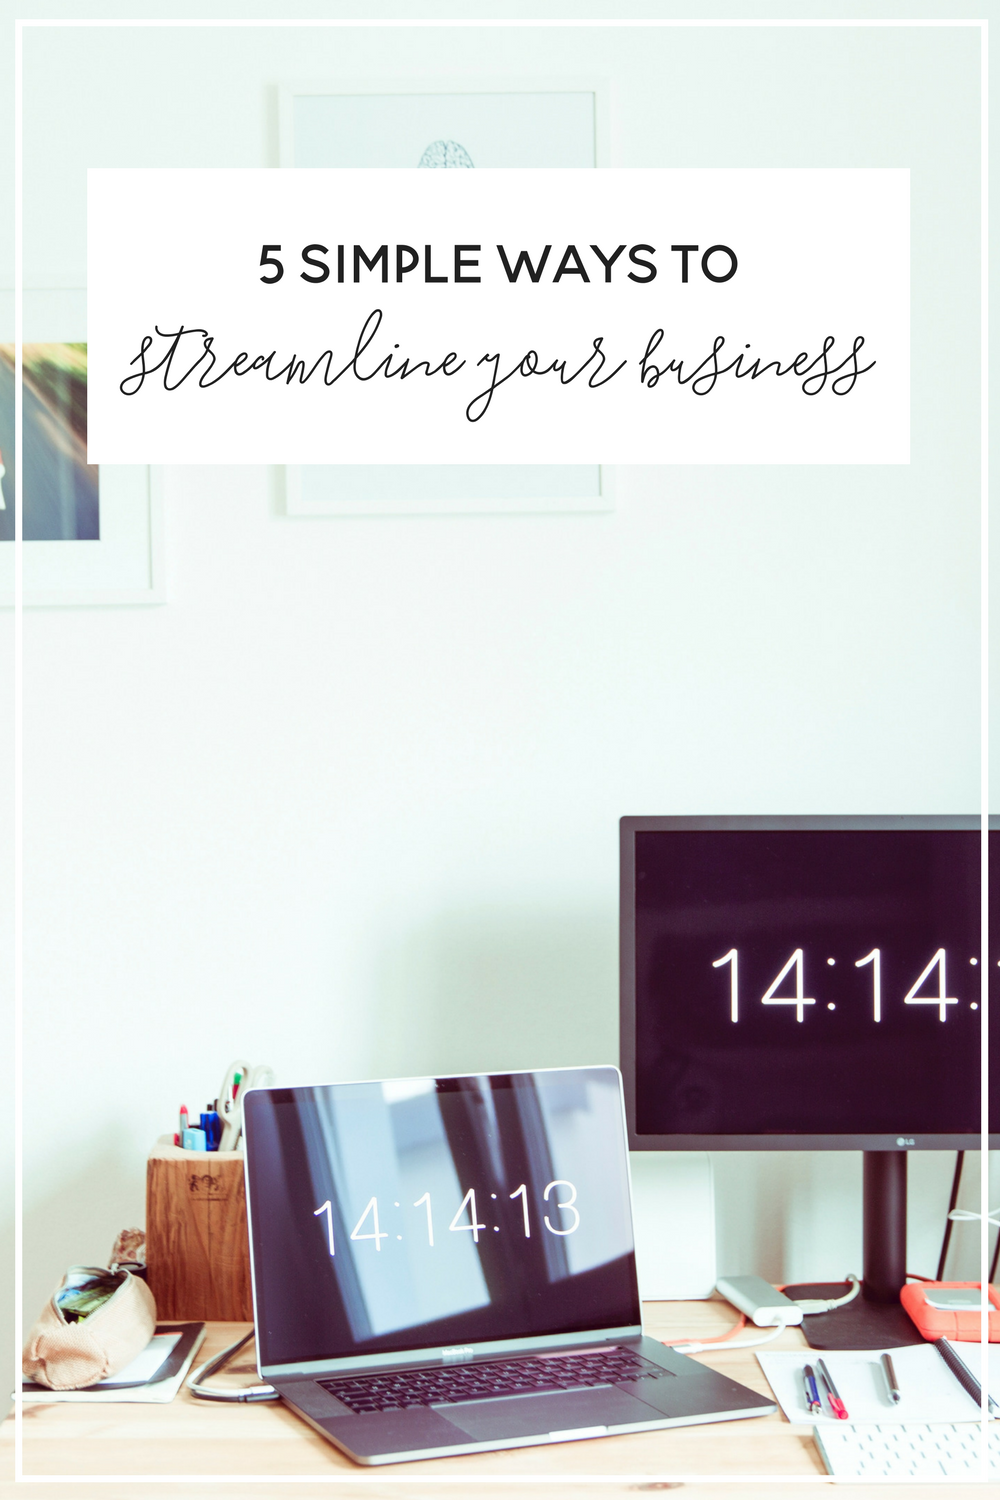 5 Simple Ways to Streamline Your Business